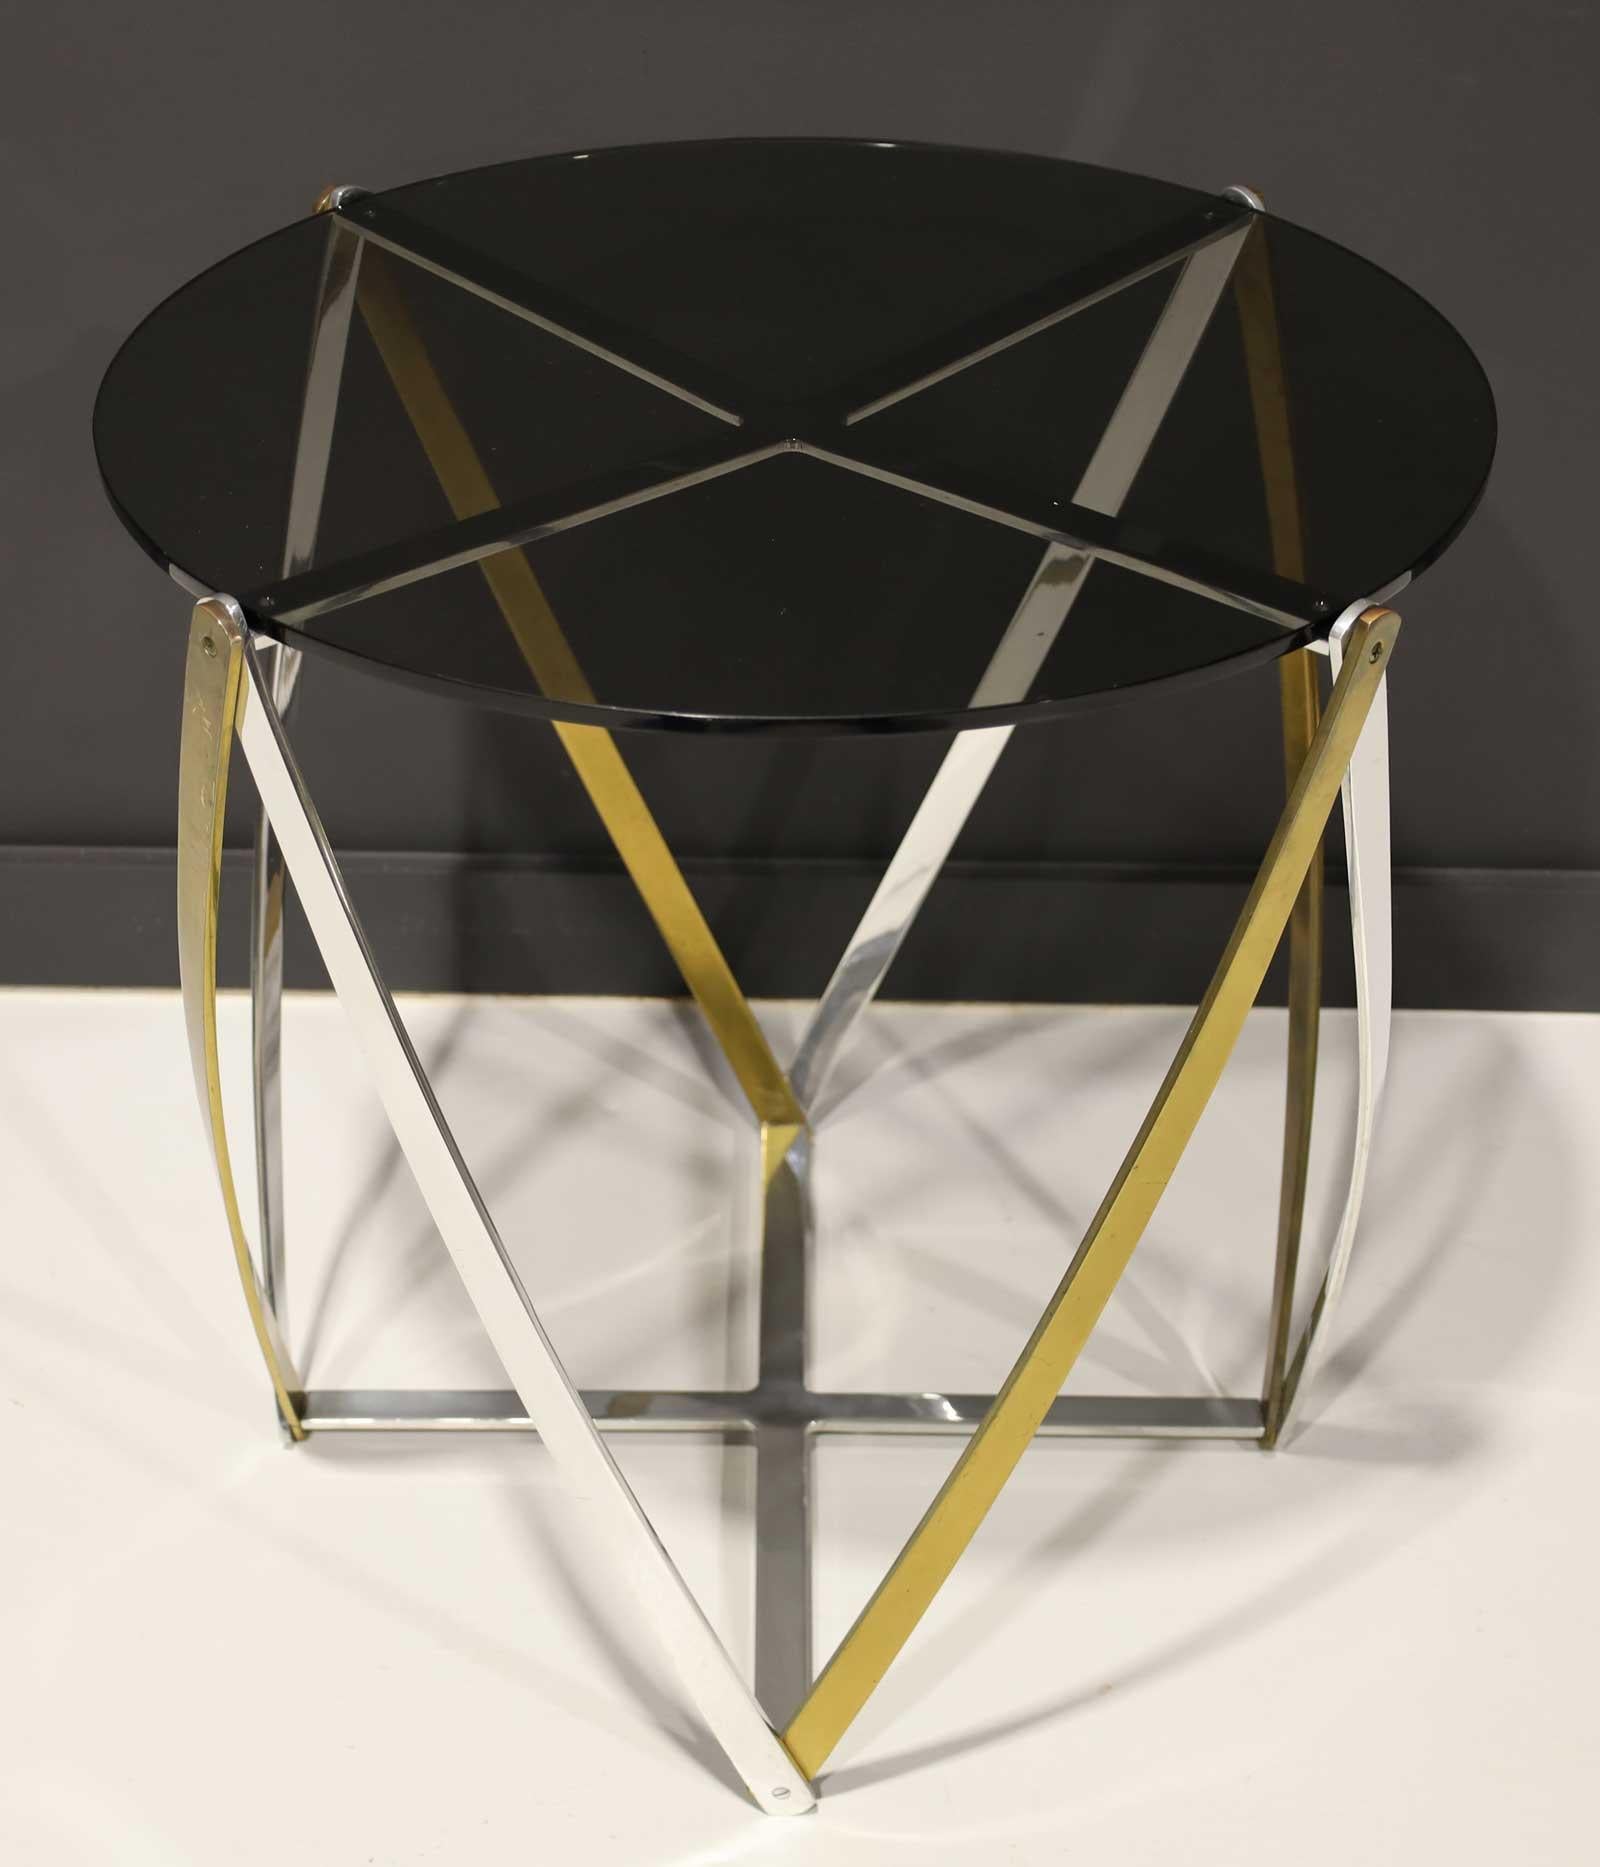 Beautiful side table by John Vesey, known for highest quality design. Mixed metals add interest to the table.